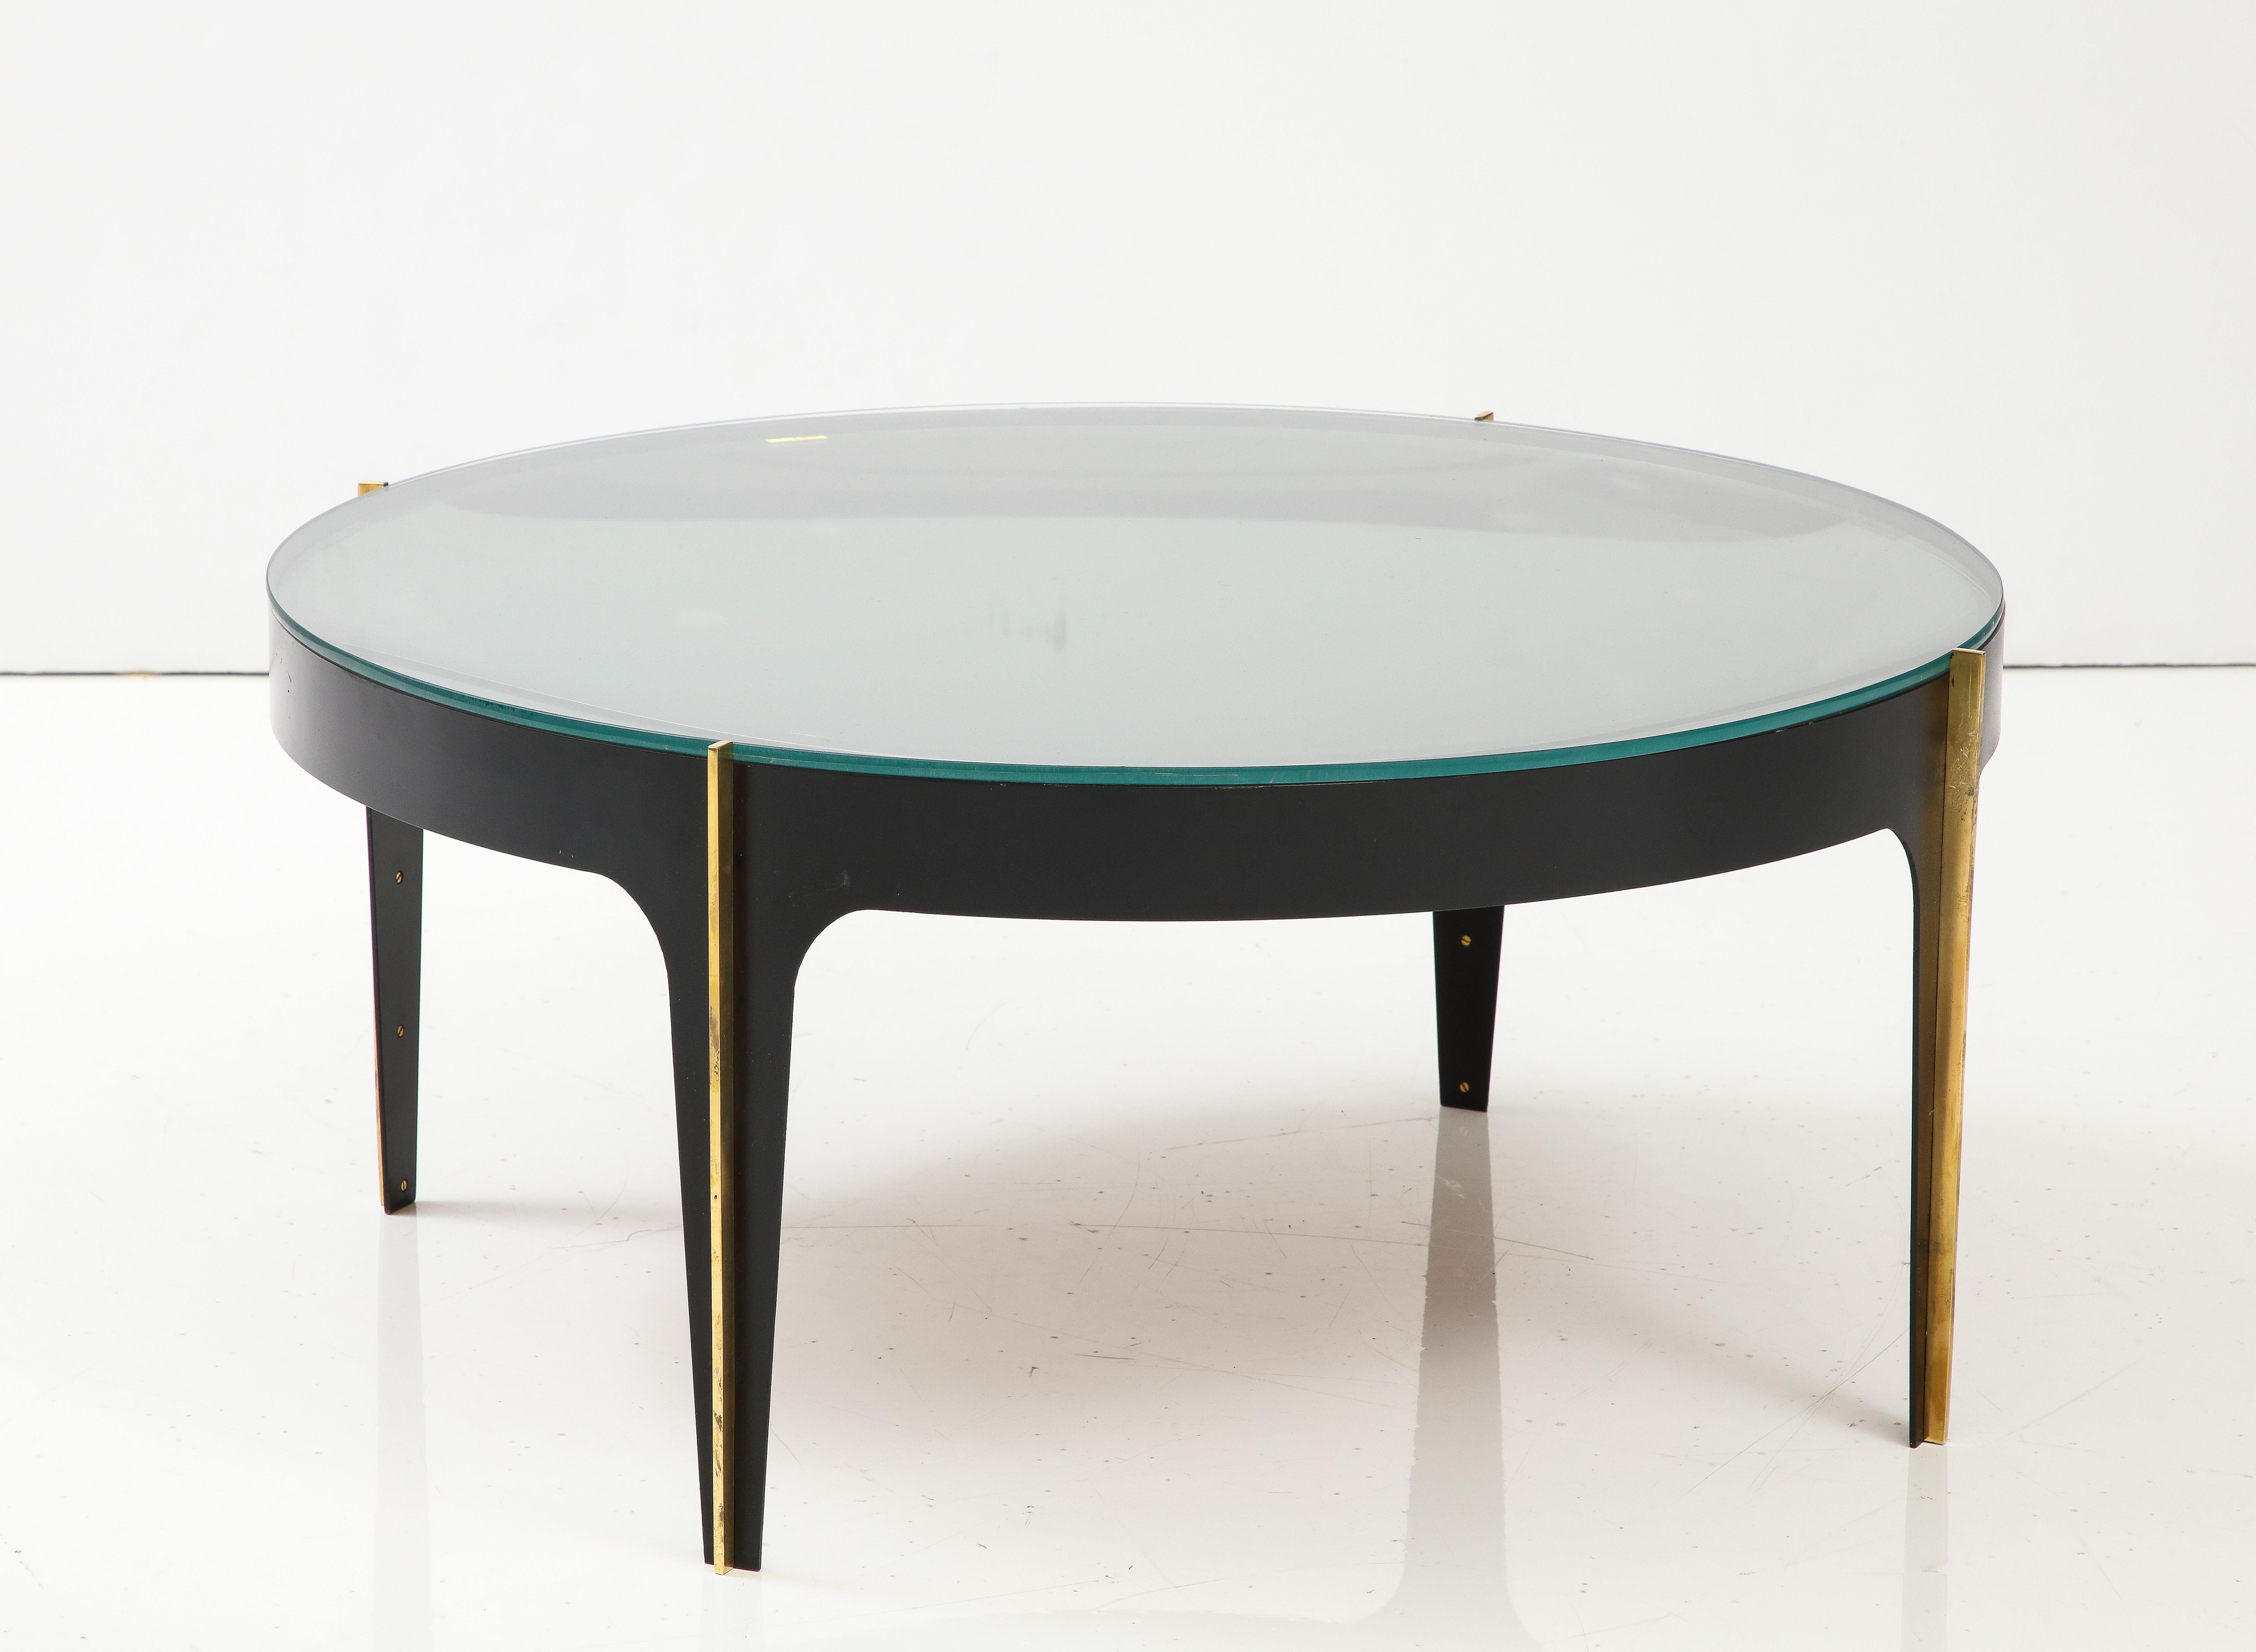 Round Cocktail Table in Black Enameled Metal, Brass and Green Grey Optical Glass In Good Condition For Sale In New York, NY